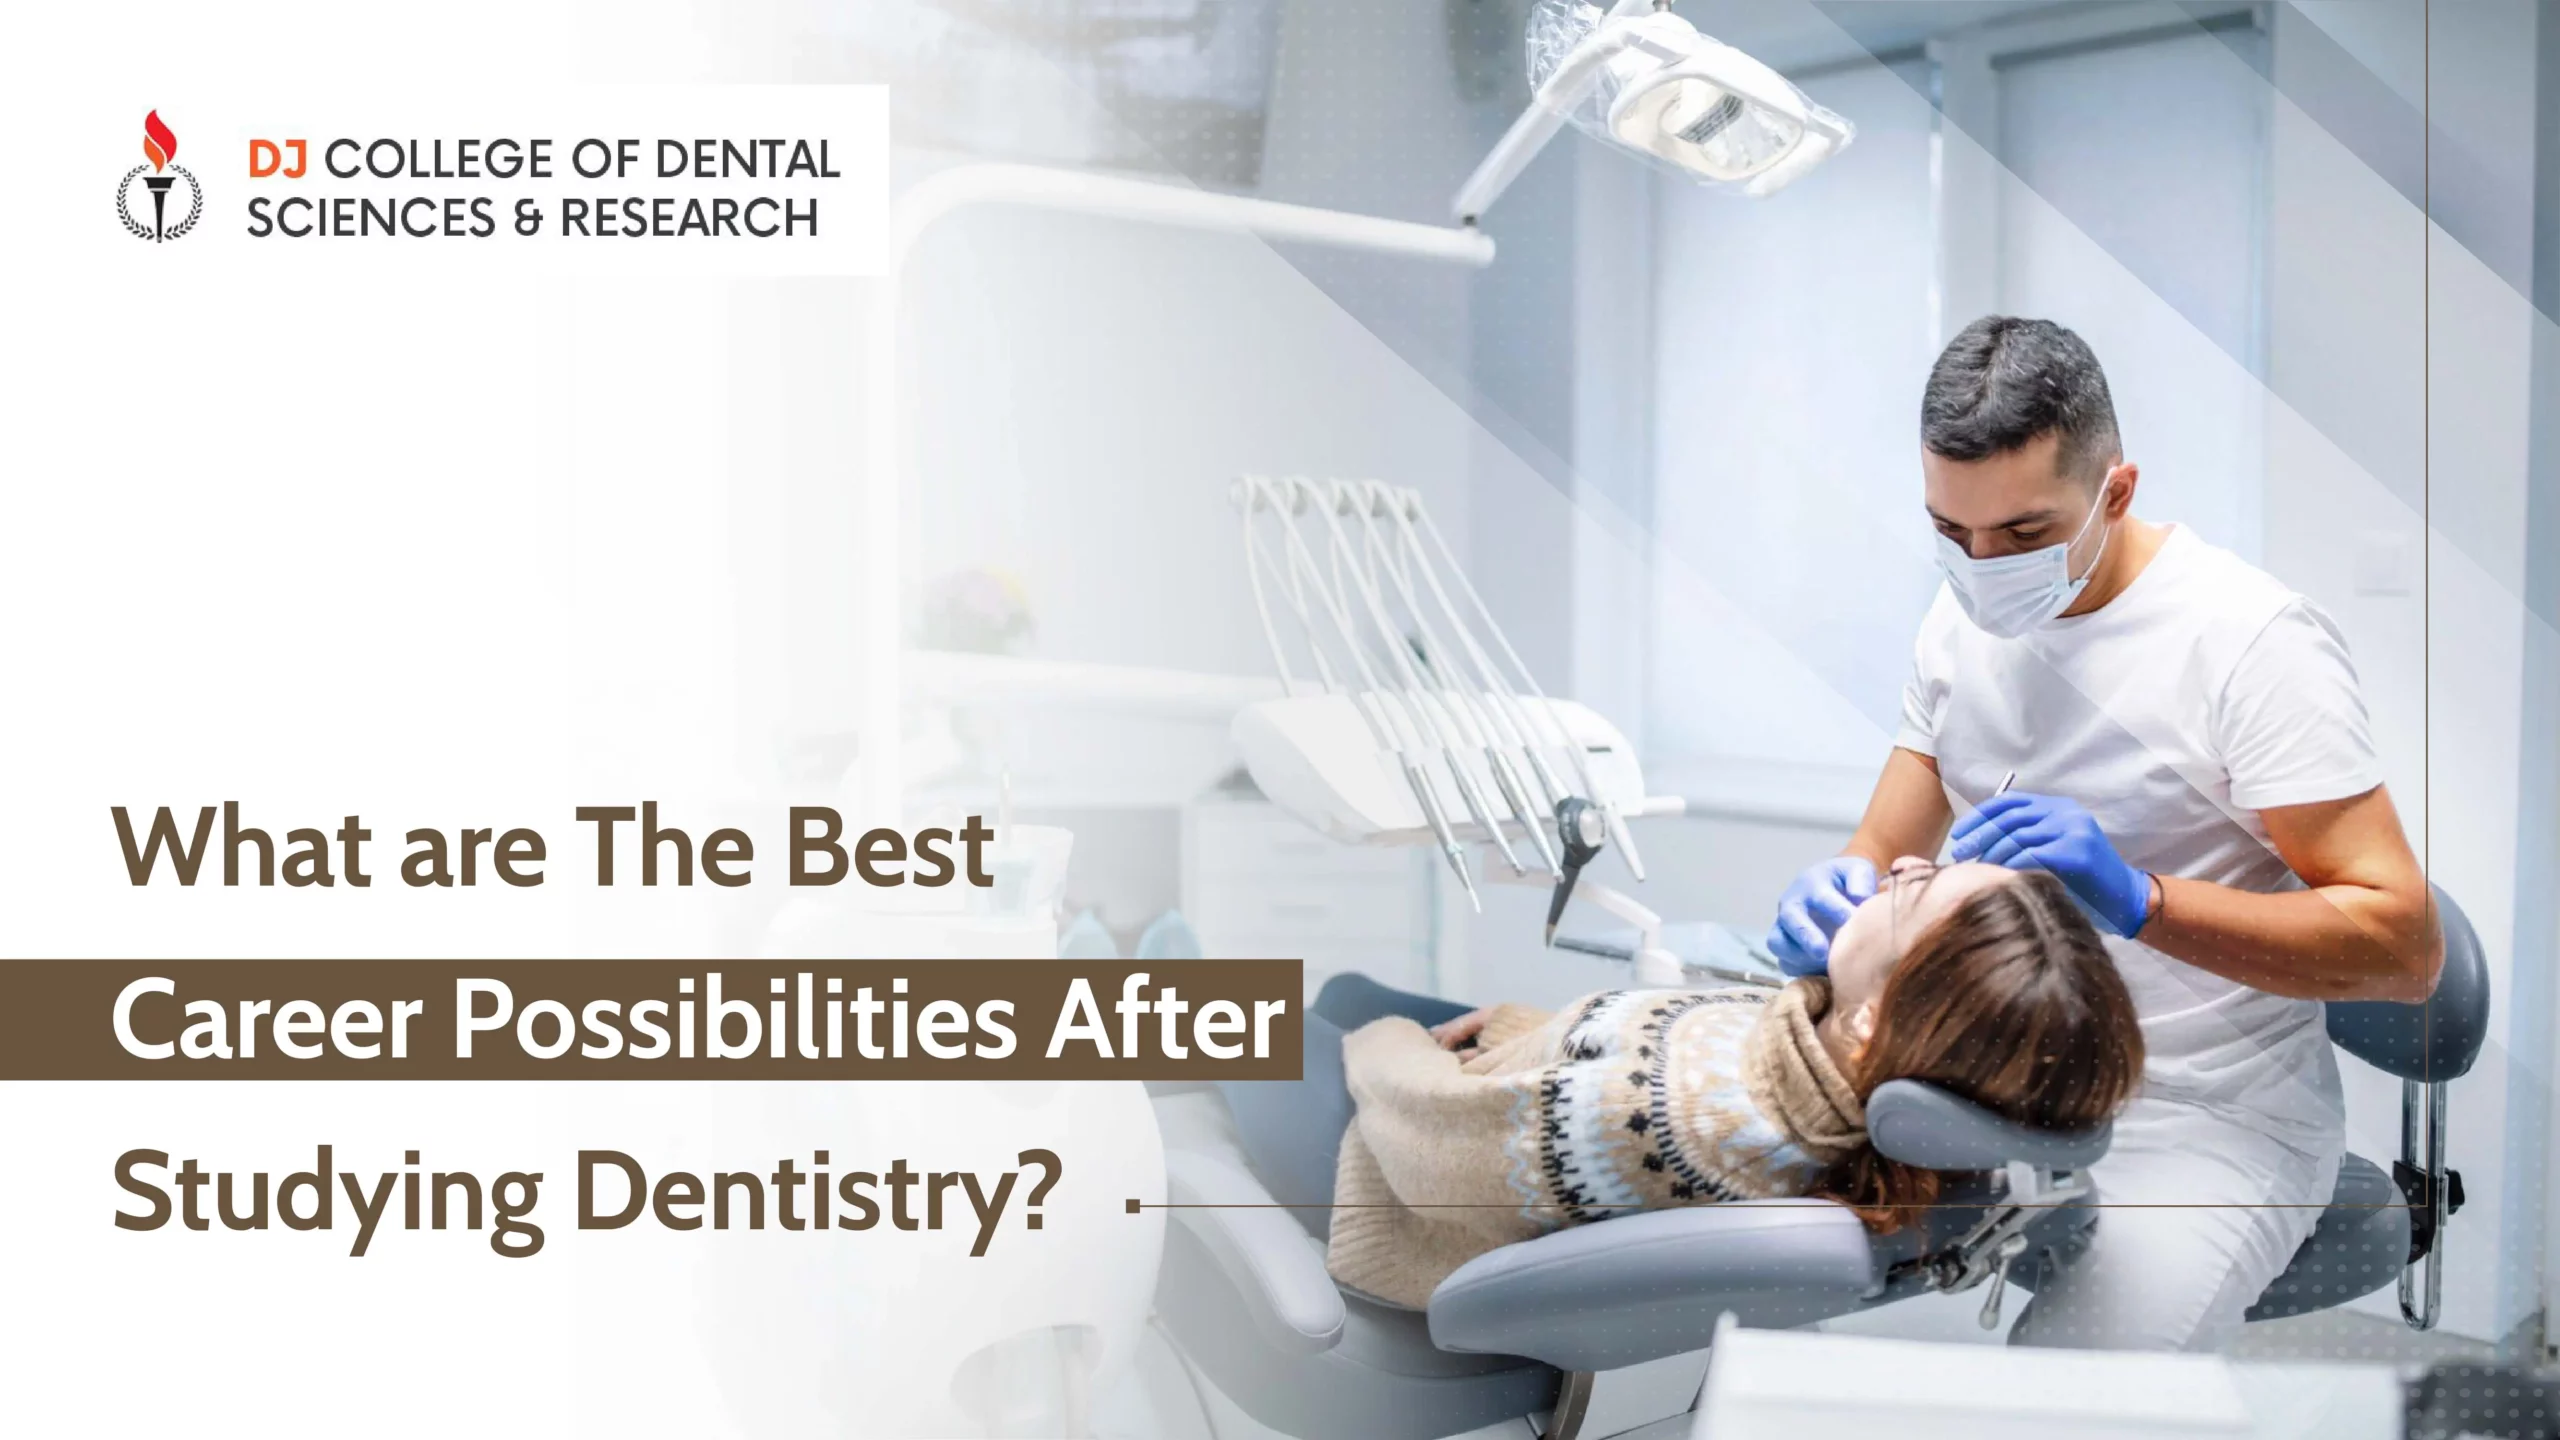 What are The Best Career Possibilities After Studying Dentistry